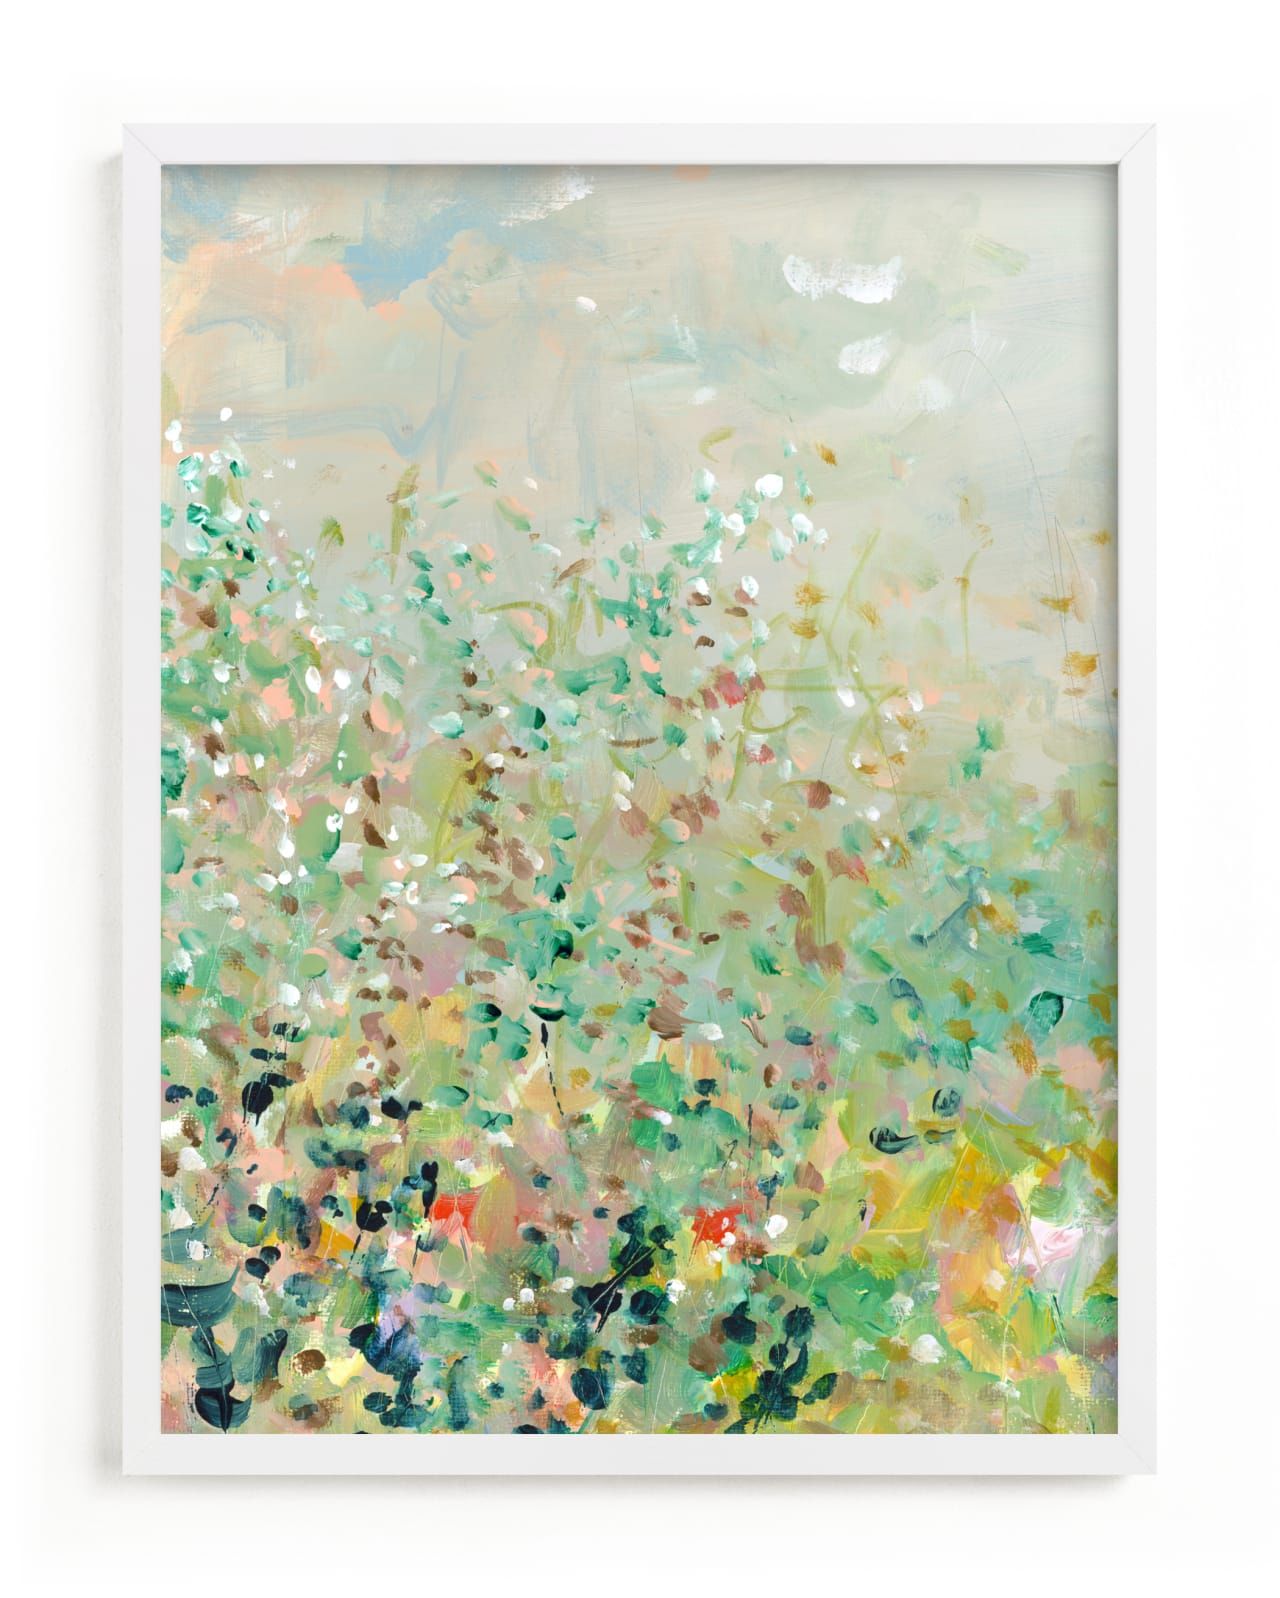 "English Garden I" - Painting Limited Edition Art Print by Lindsay Megahed. | Minted